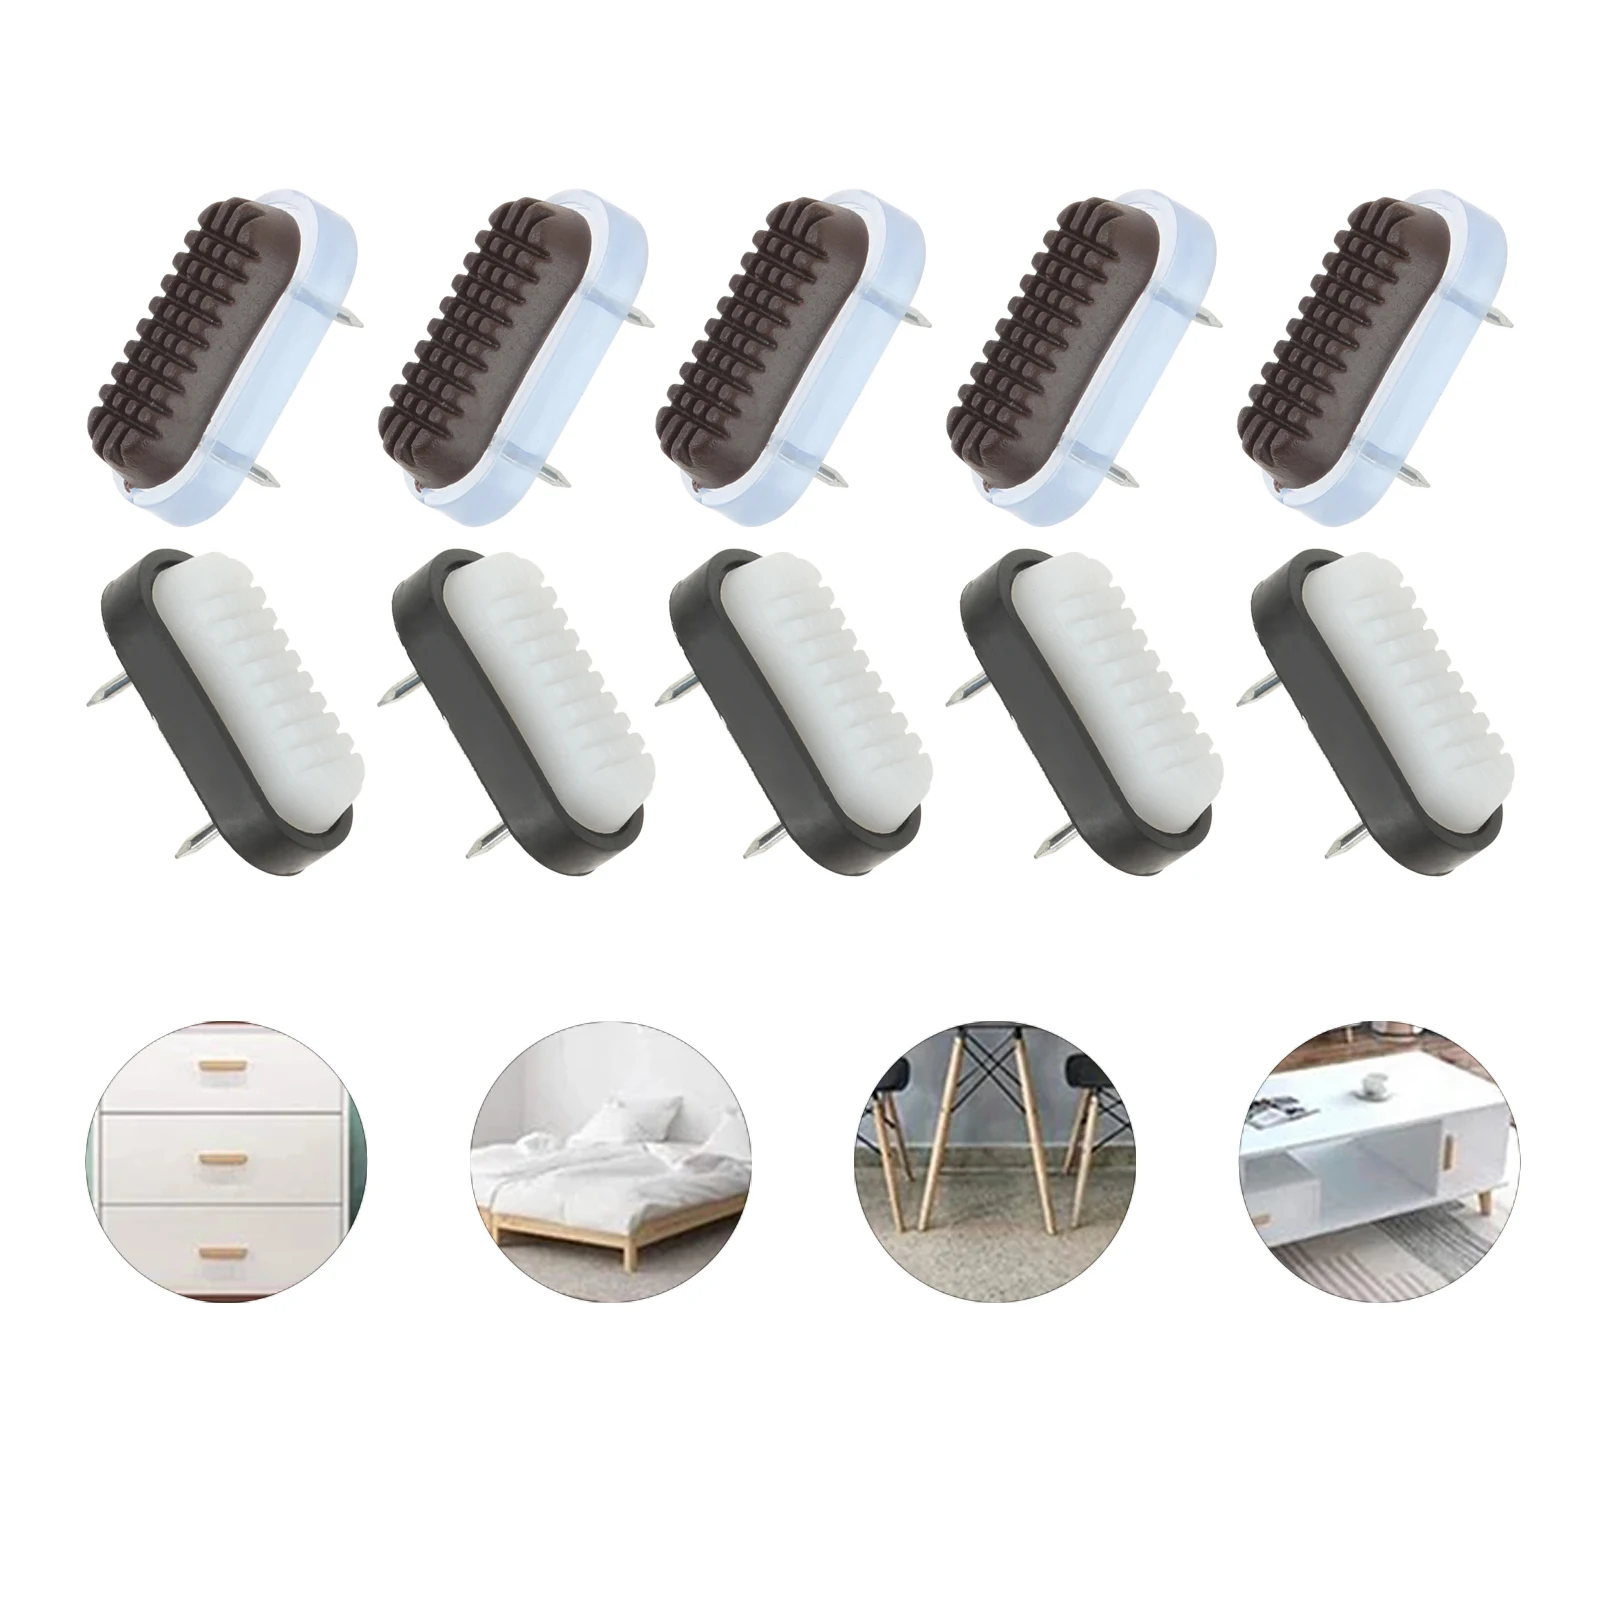 10Pcs Increase Height Furniture Glides Pads Furniture Sliders Chair Leg Movers Floor Protectors Double Nail on Furniture Pads